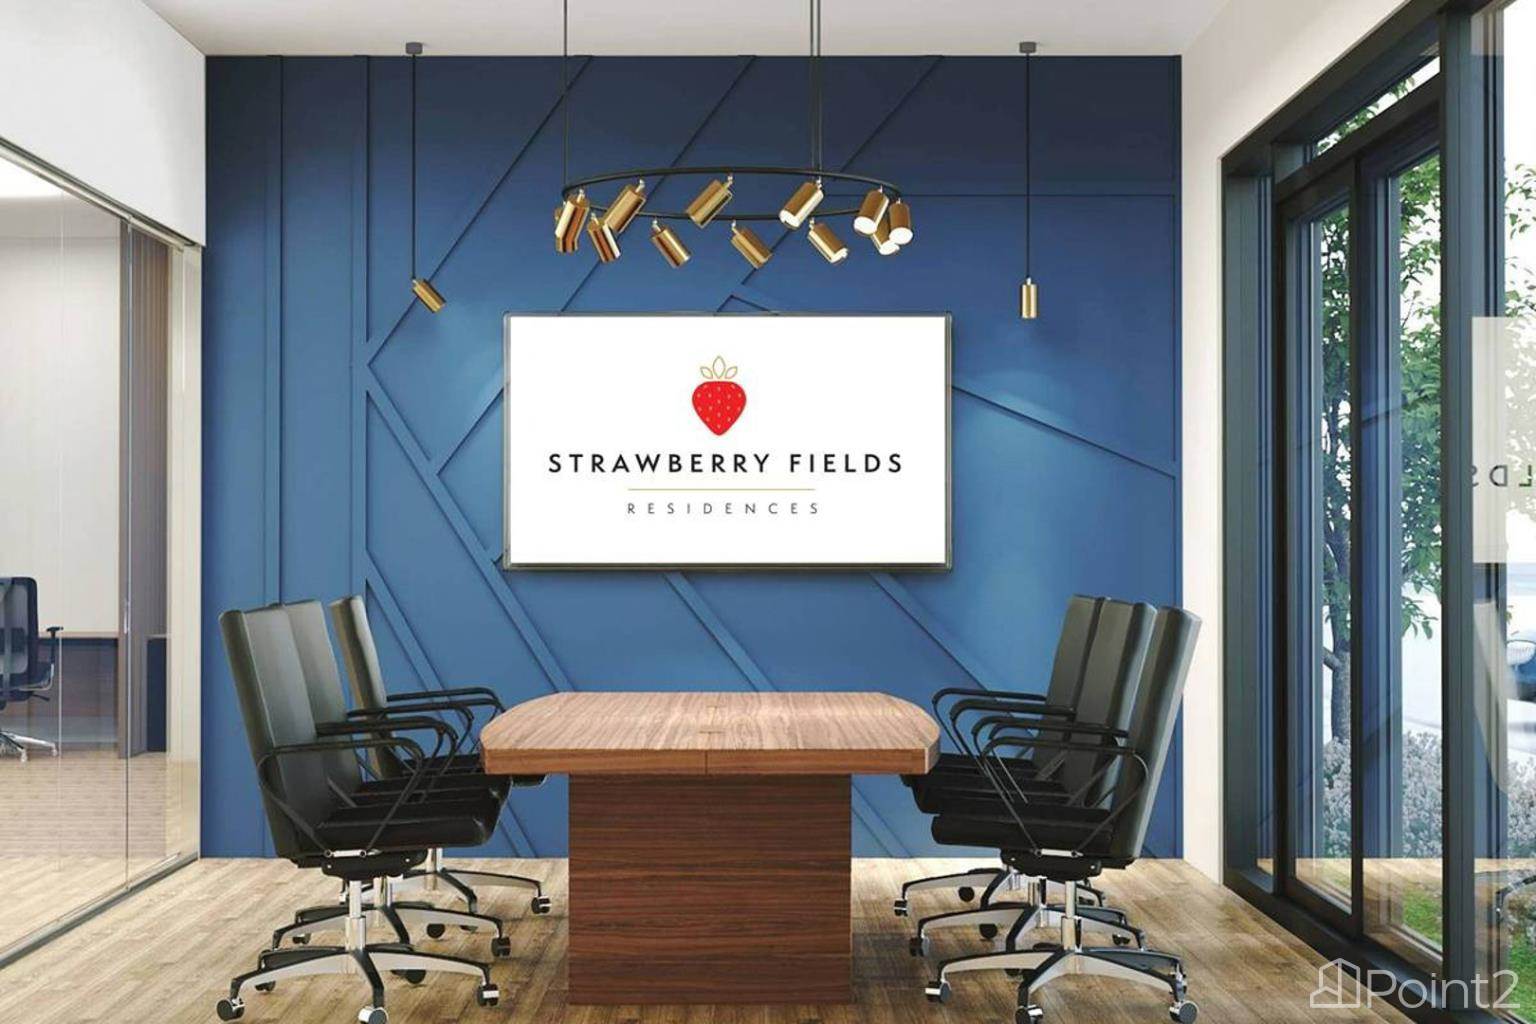 Strawberry Fields Residences Insider Vip Access At Kennedy Mayfield, Caledon, ON L7C3P4 Photo 4